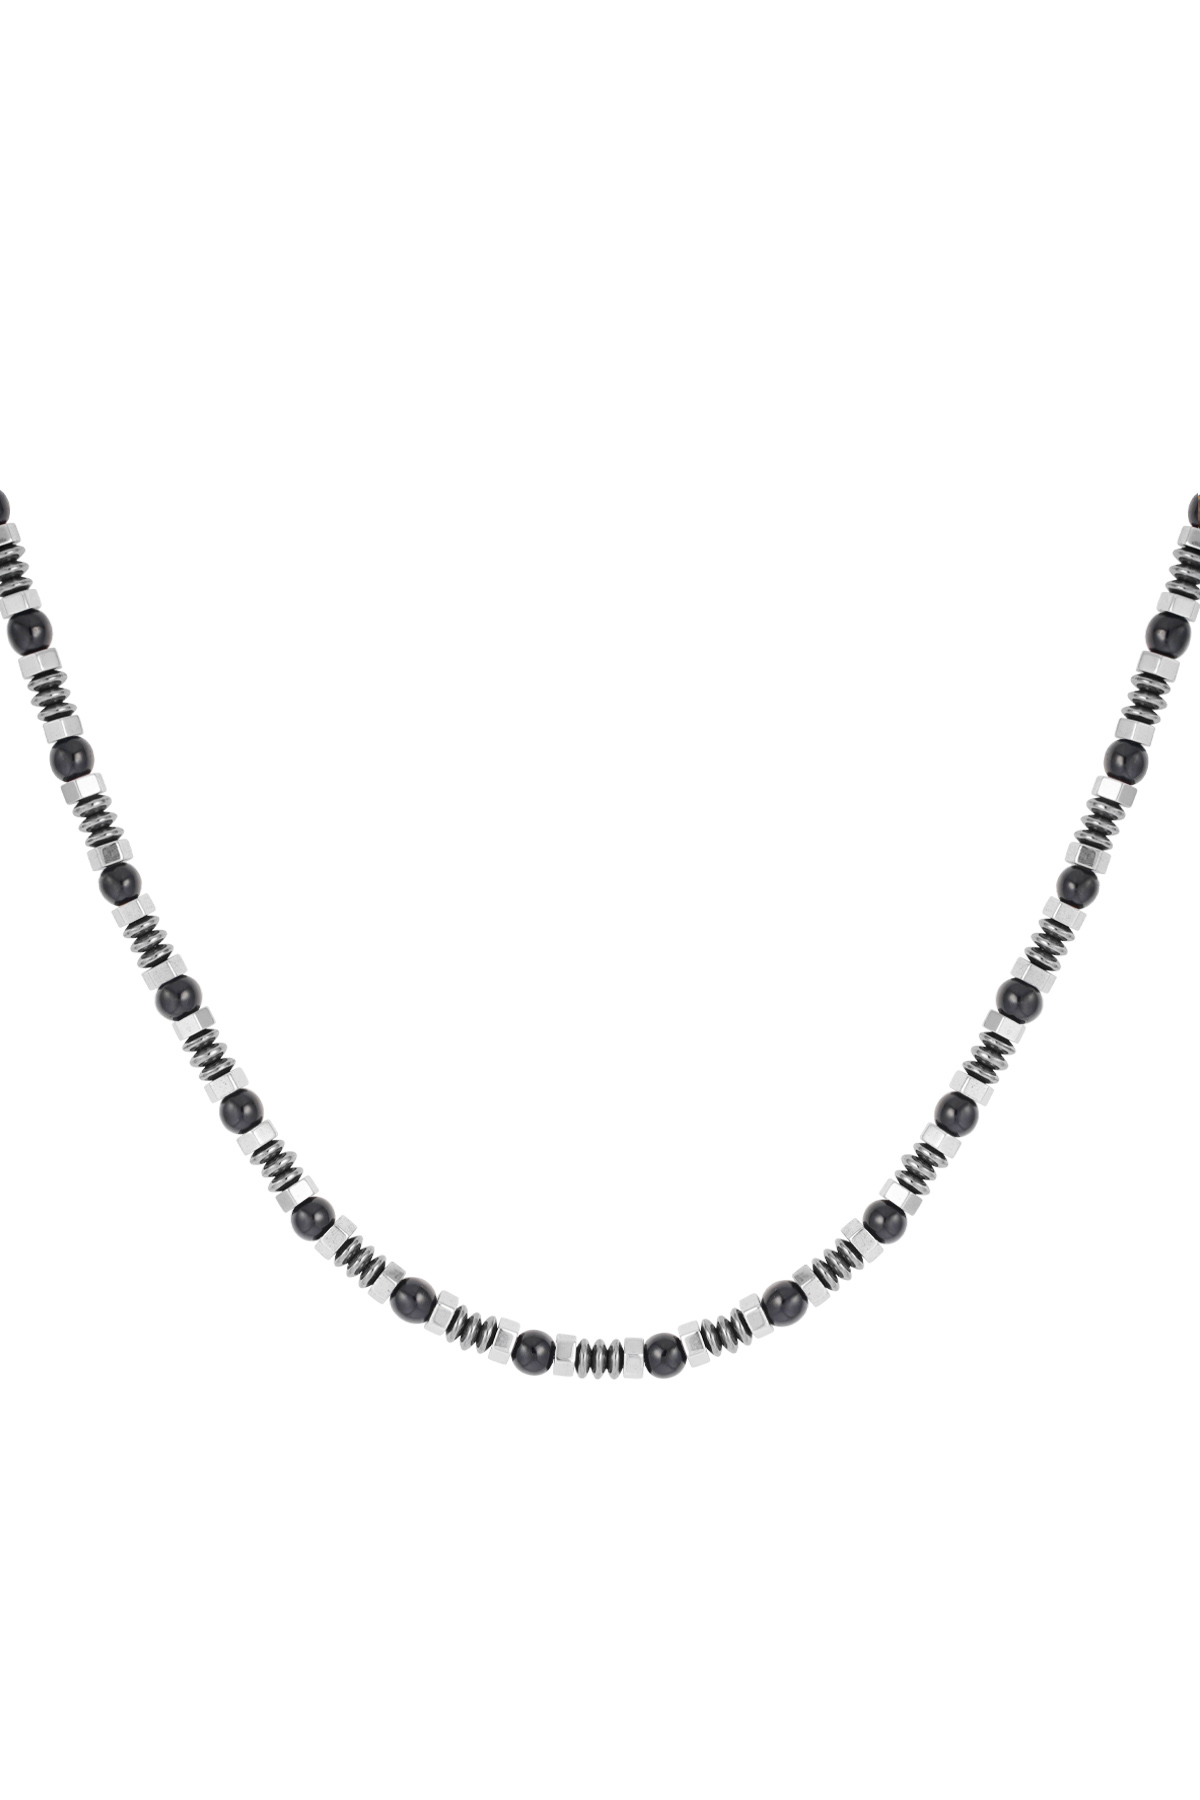 Men's necklace with charms and beads - black/silver  h5 